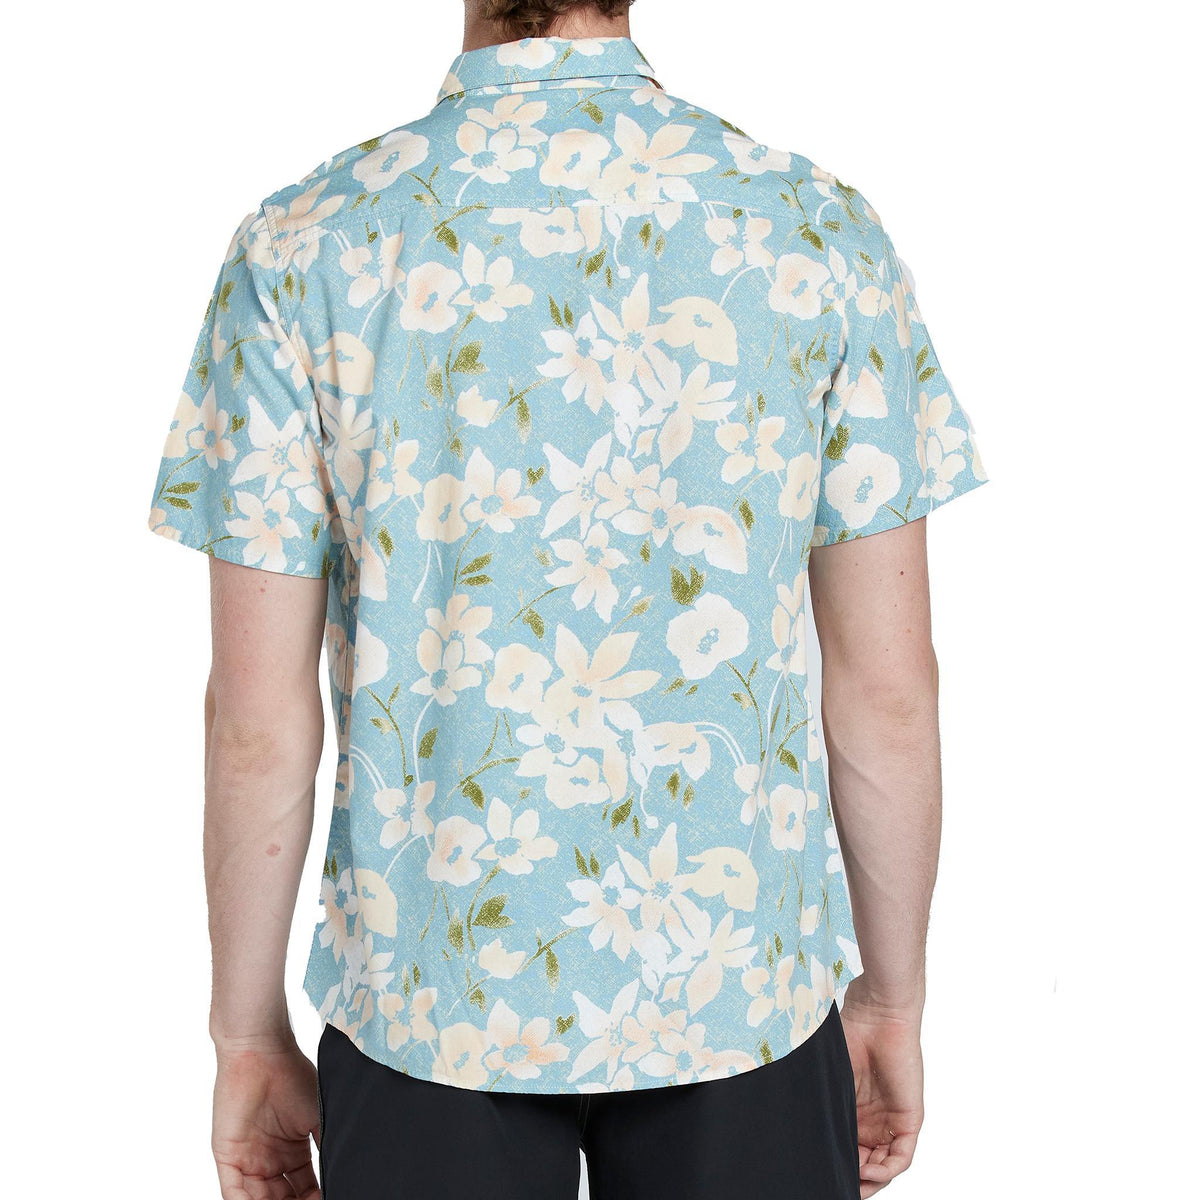 Back view of a men&#39;s short sleeve floral button-down shirt in a vibrant banjo blue color. The floral pattern is intricately designed with various hues against the blue background. The shirt is neatly tailored and features a classic collar. This stylish garment exudes a refreshing and summery vibe, perfect for casual outings or gatherings.